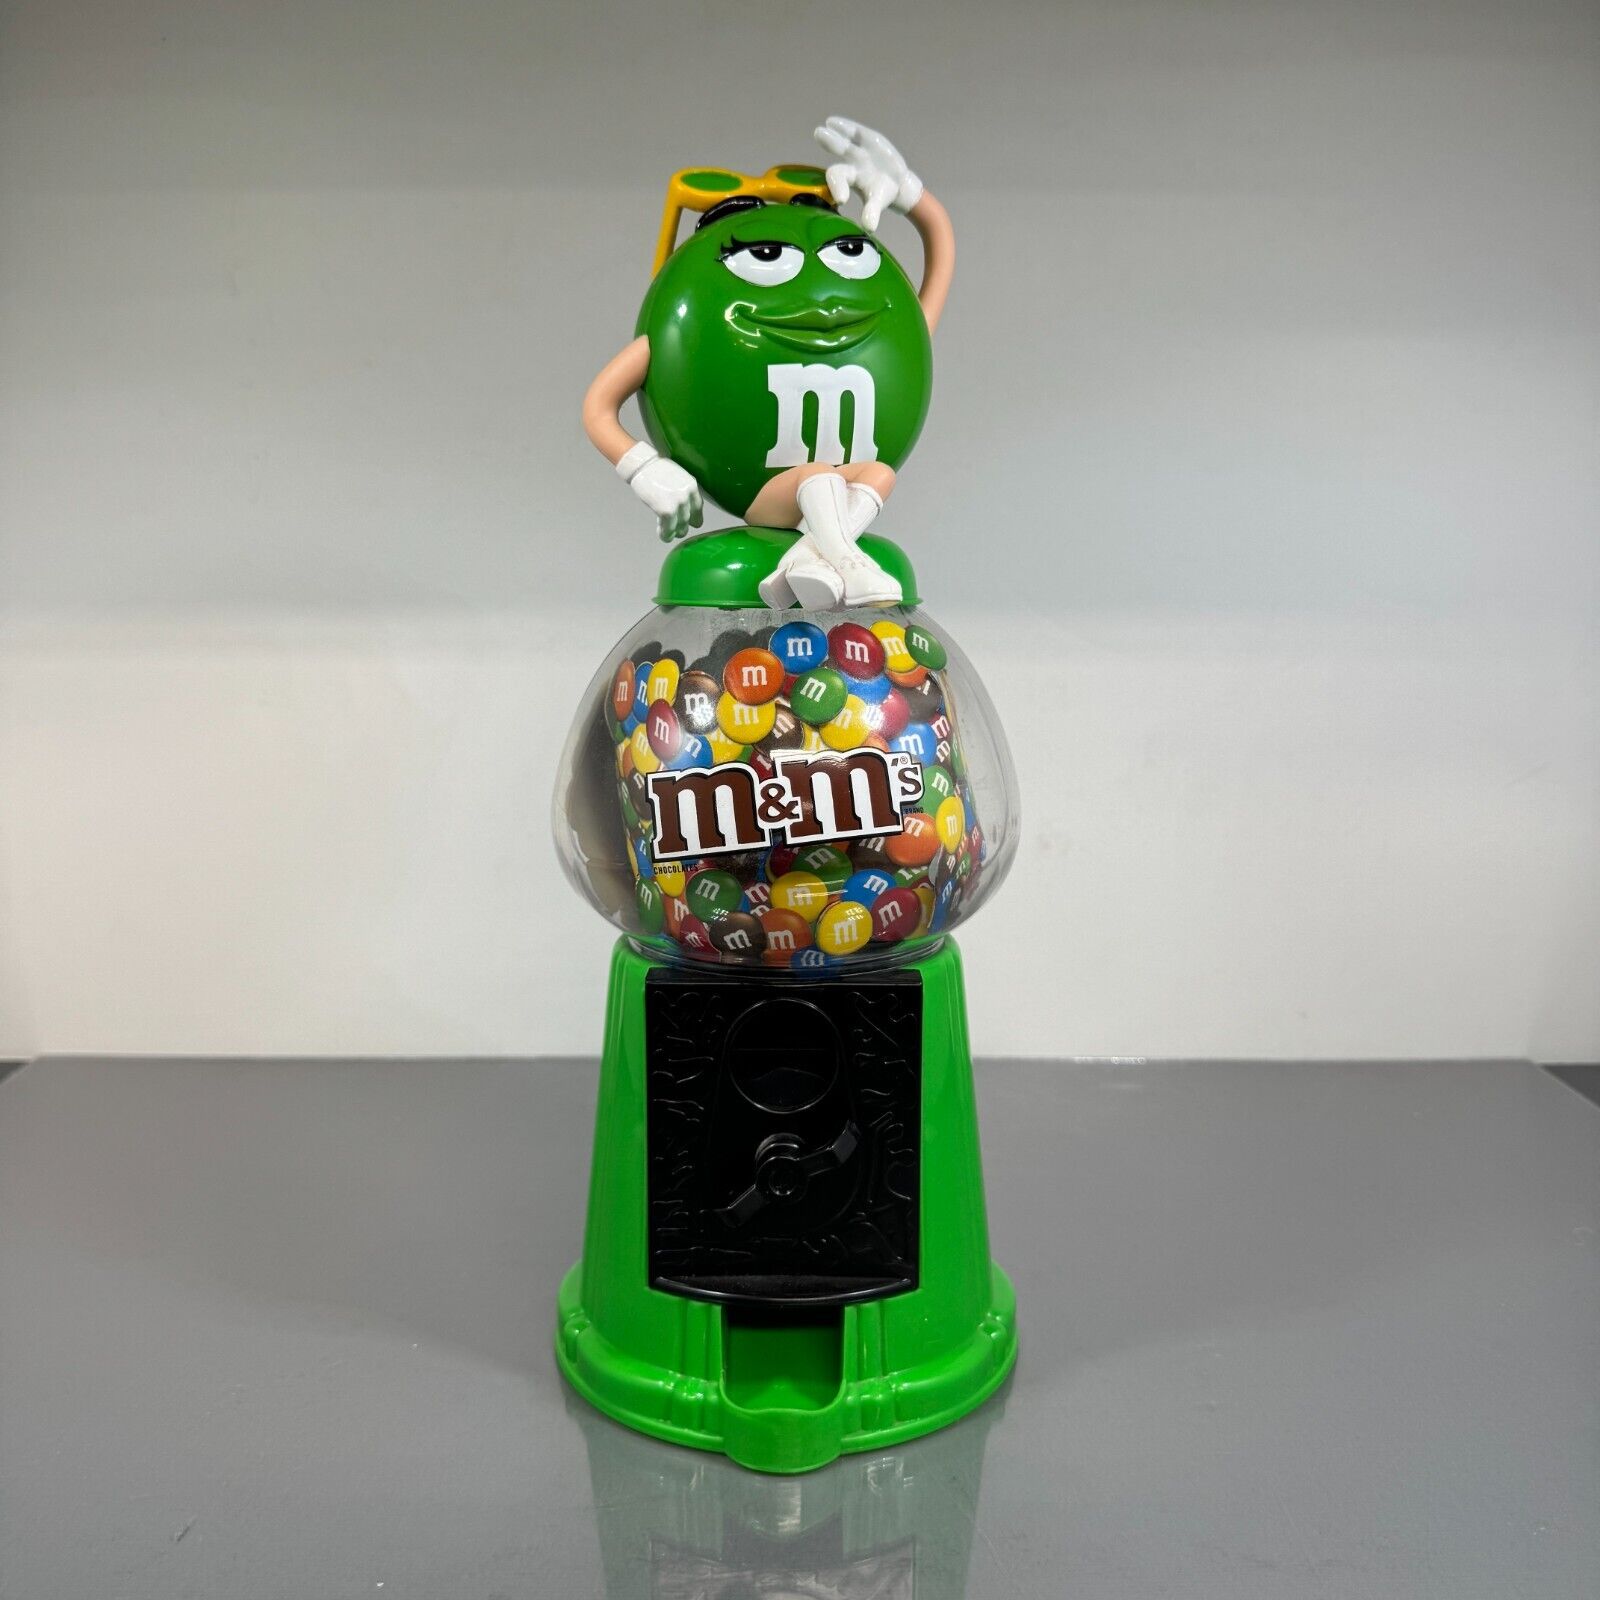 M&Ms Ms. Green Novelty Candy Dispenser Coin Bank Gumball Machine 2008 NEW